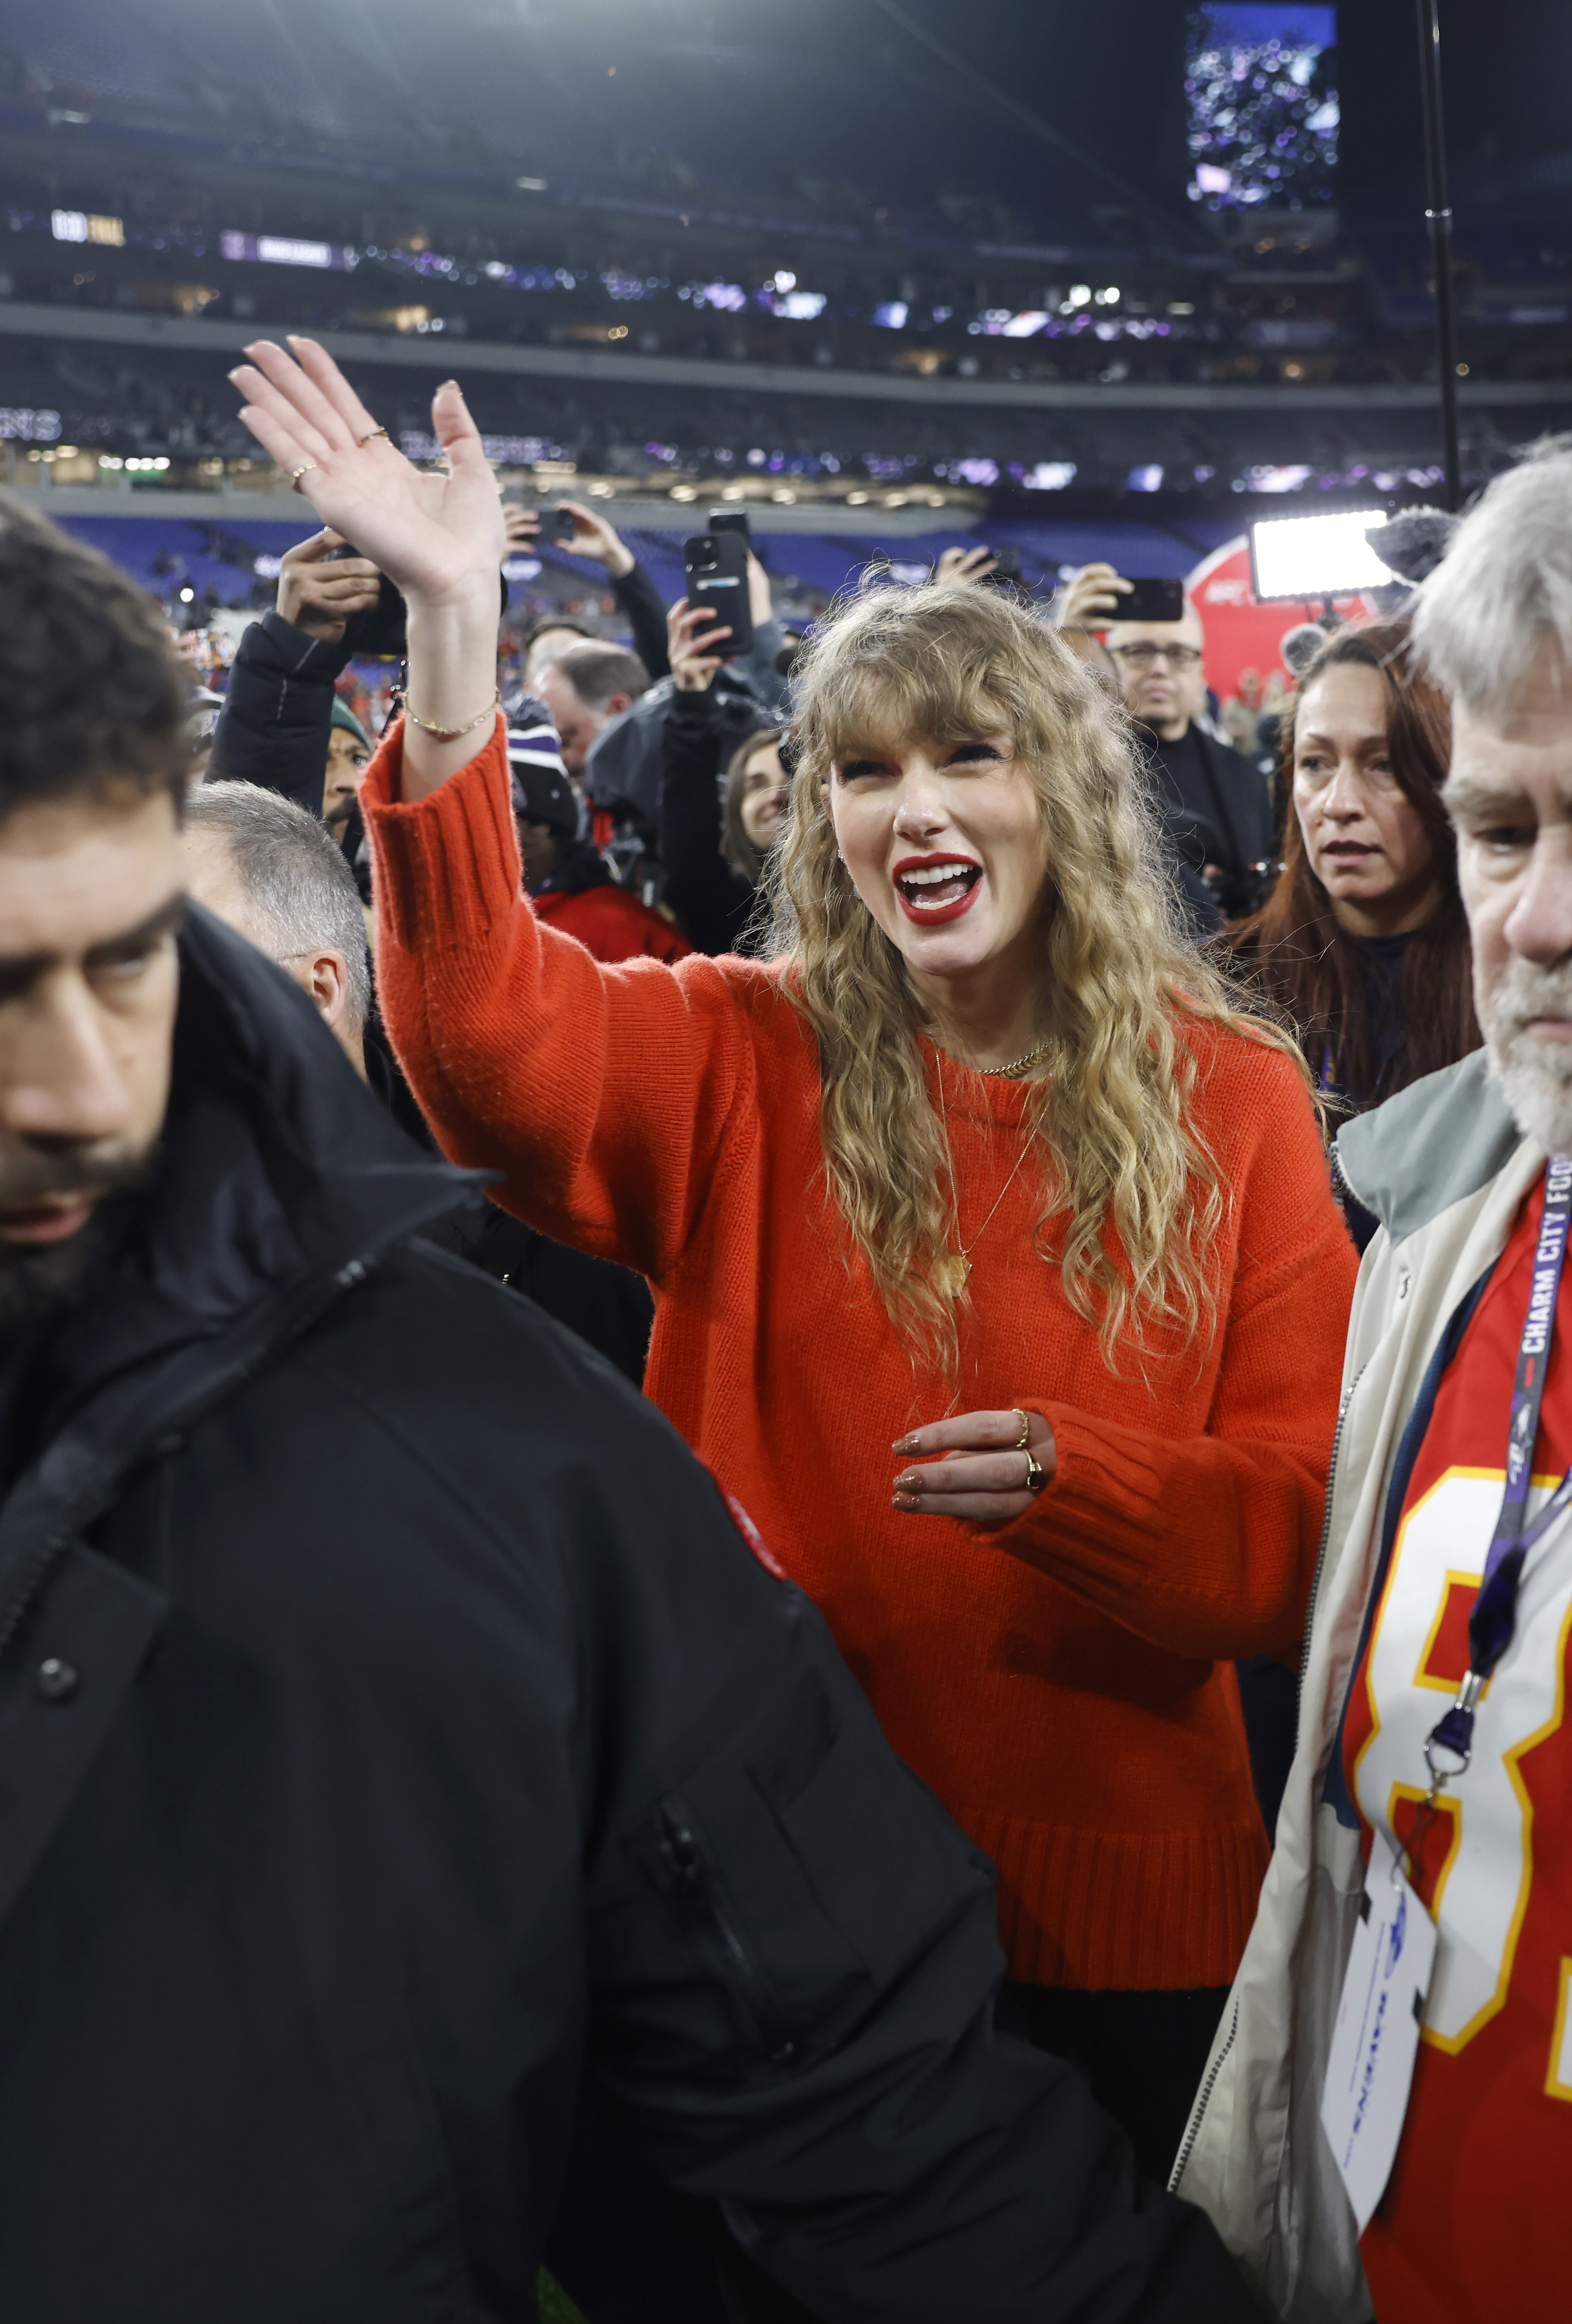 Taylor Swift pictured on the field after the Kansas City Chiefs defeated the Baltimore Ravens in the AFC Championship game at M&T Bank Stadium in Baltimore, MD.